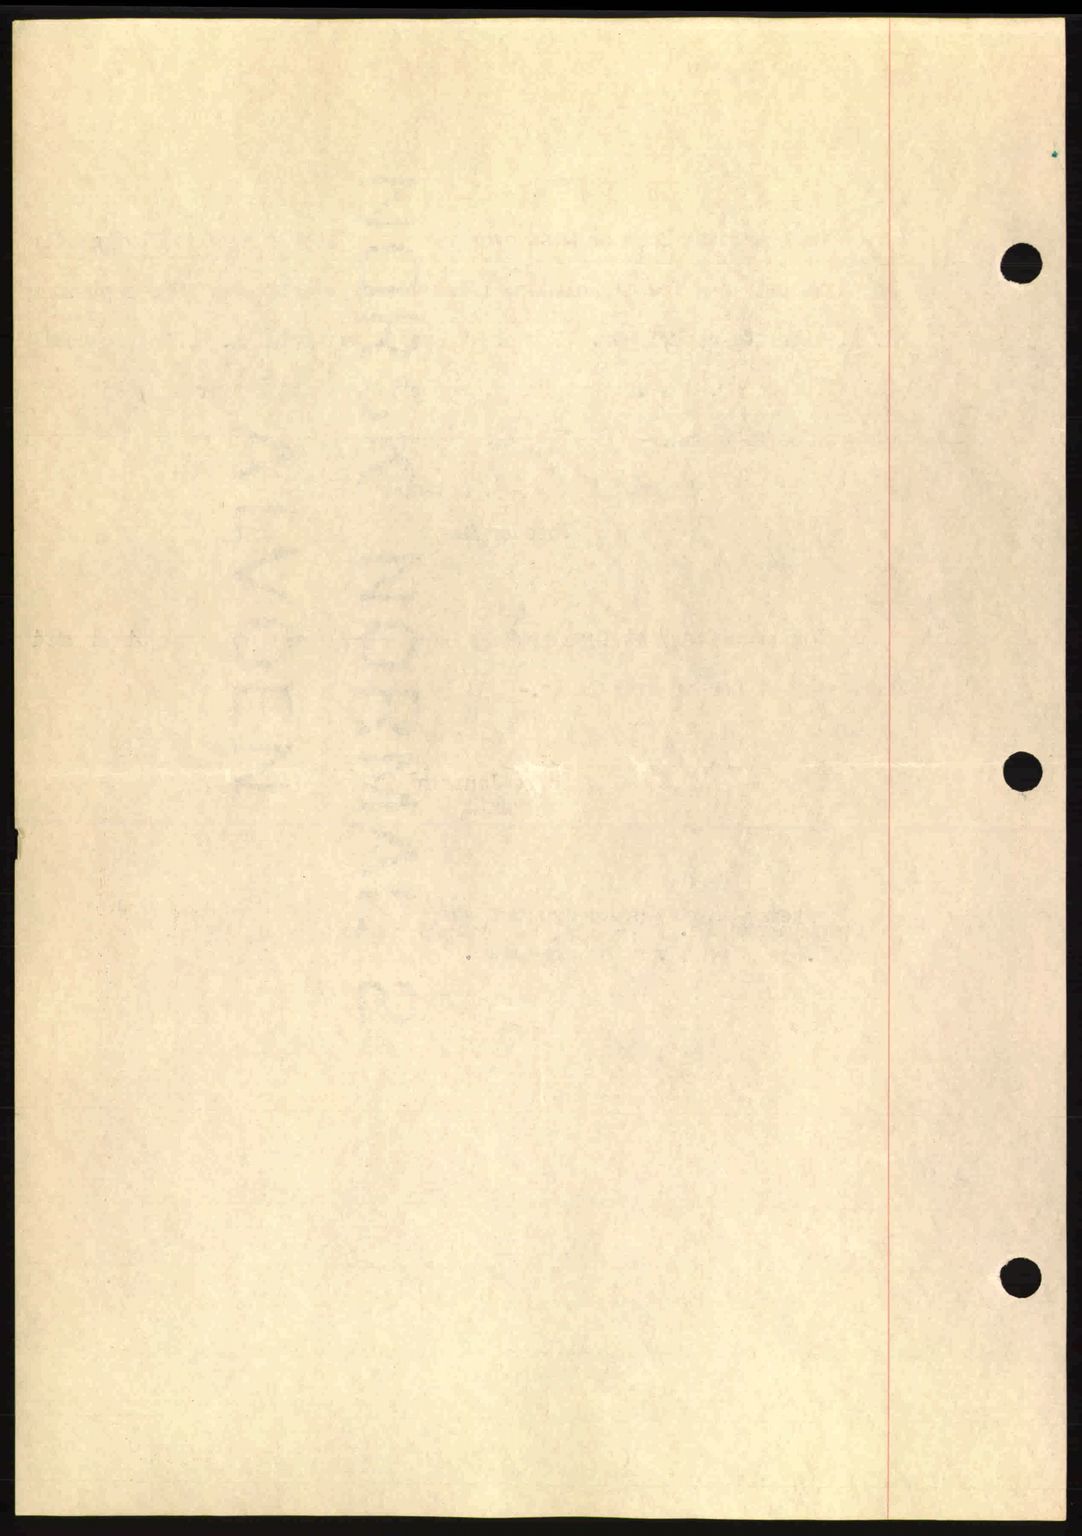 Indre Sogn tingrett, SAB/A-3301/1/G/Gb/Gba/L0030: Mortgage book no. 30, 1935-1937, Deed date: 06.11.1936